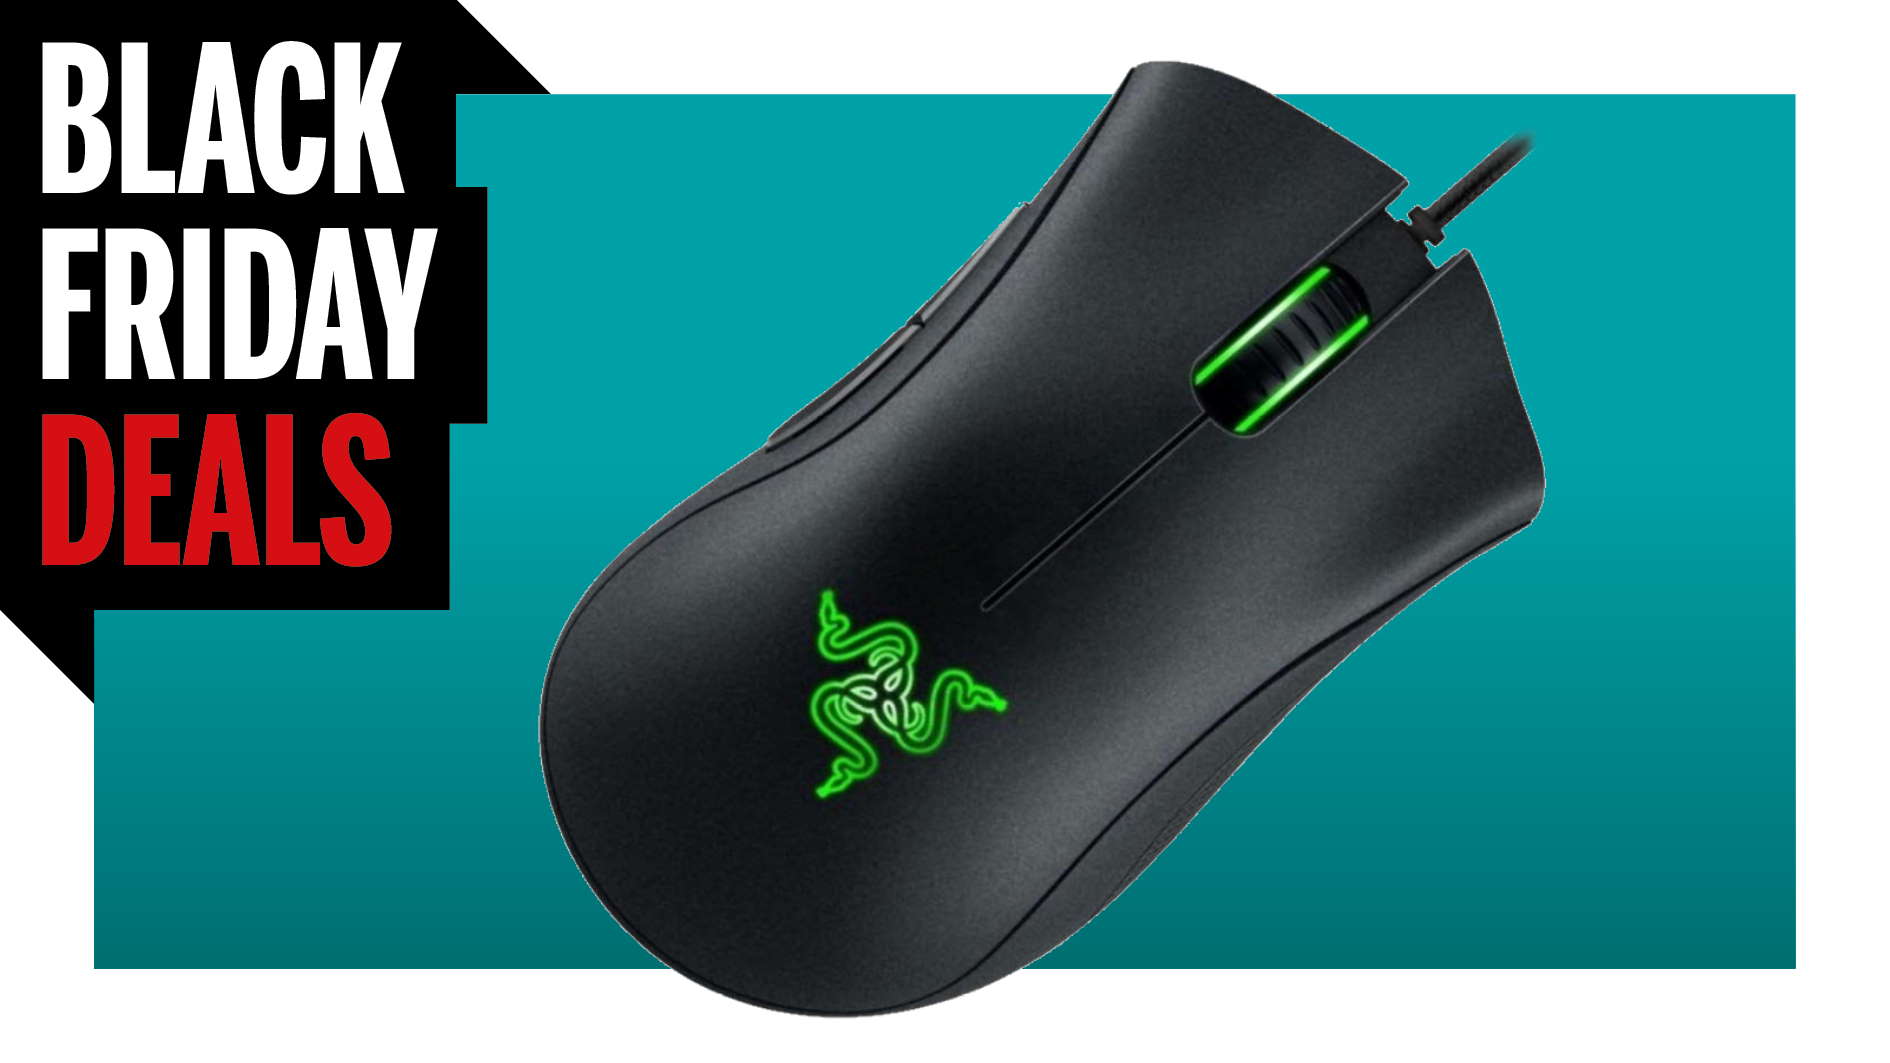  My beloved Razer DeathAdder gaming mouse is only $20 right now 